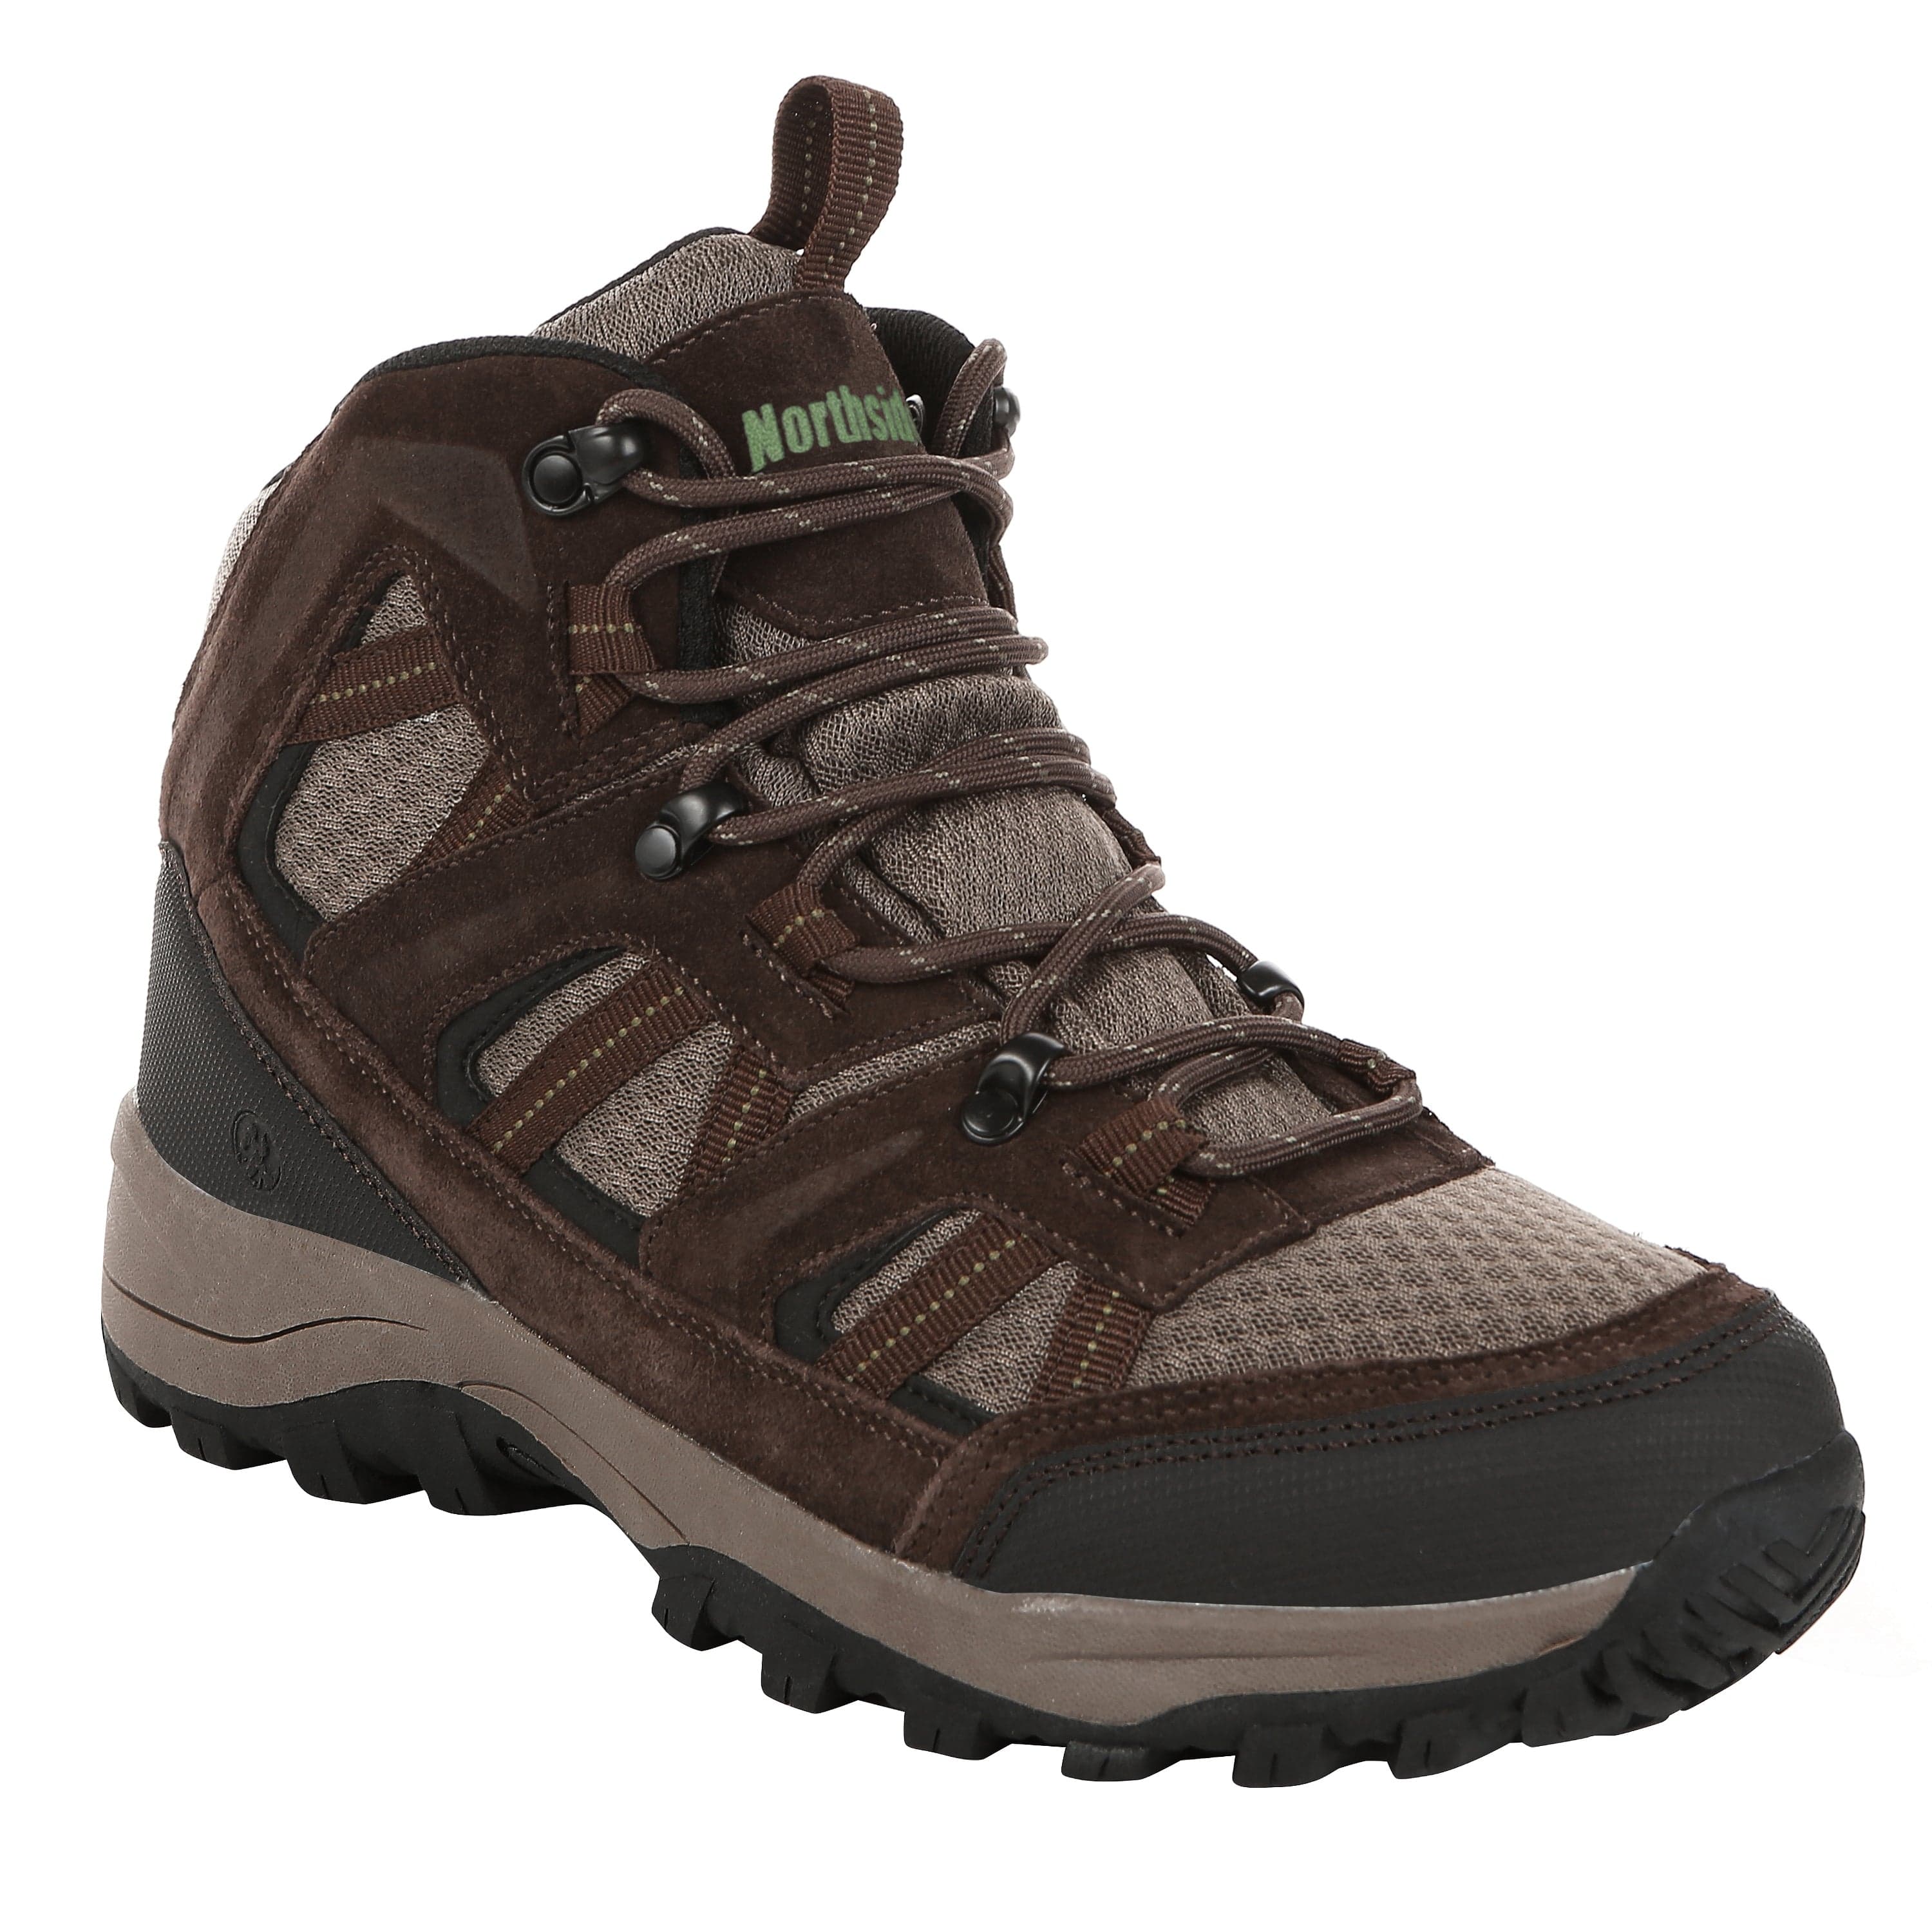 Men's Arlow Canyon Mid Hiking Boot - Northside USA